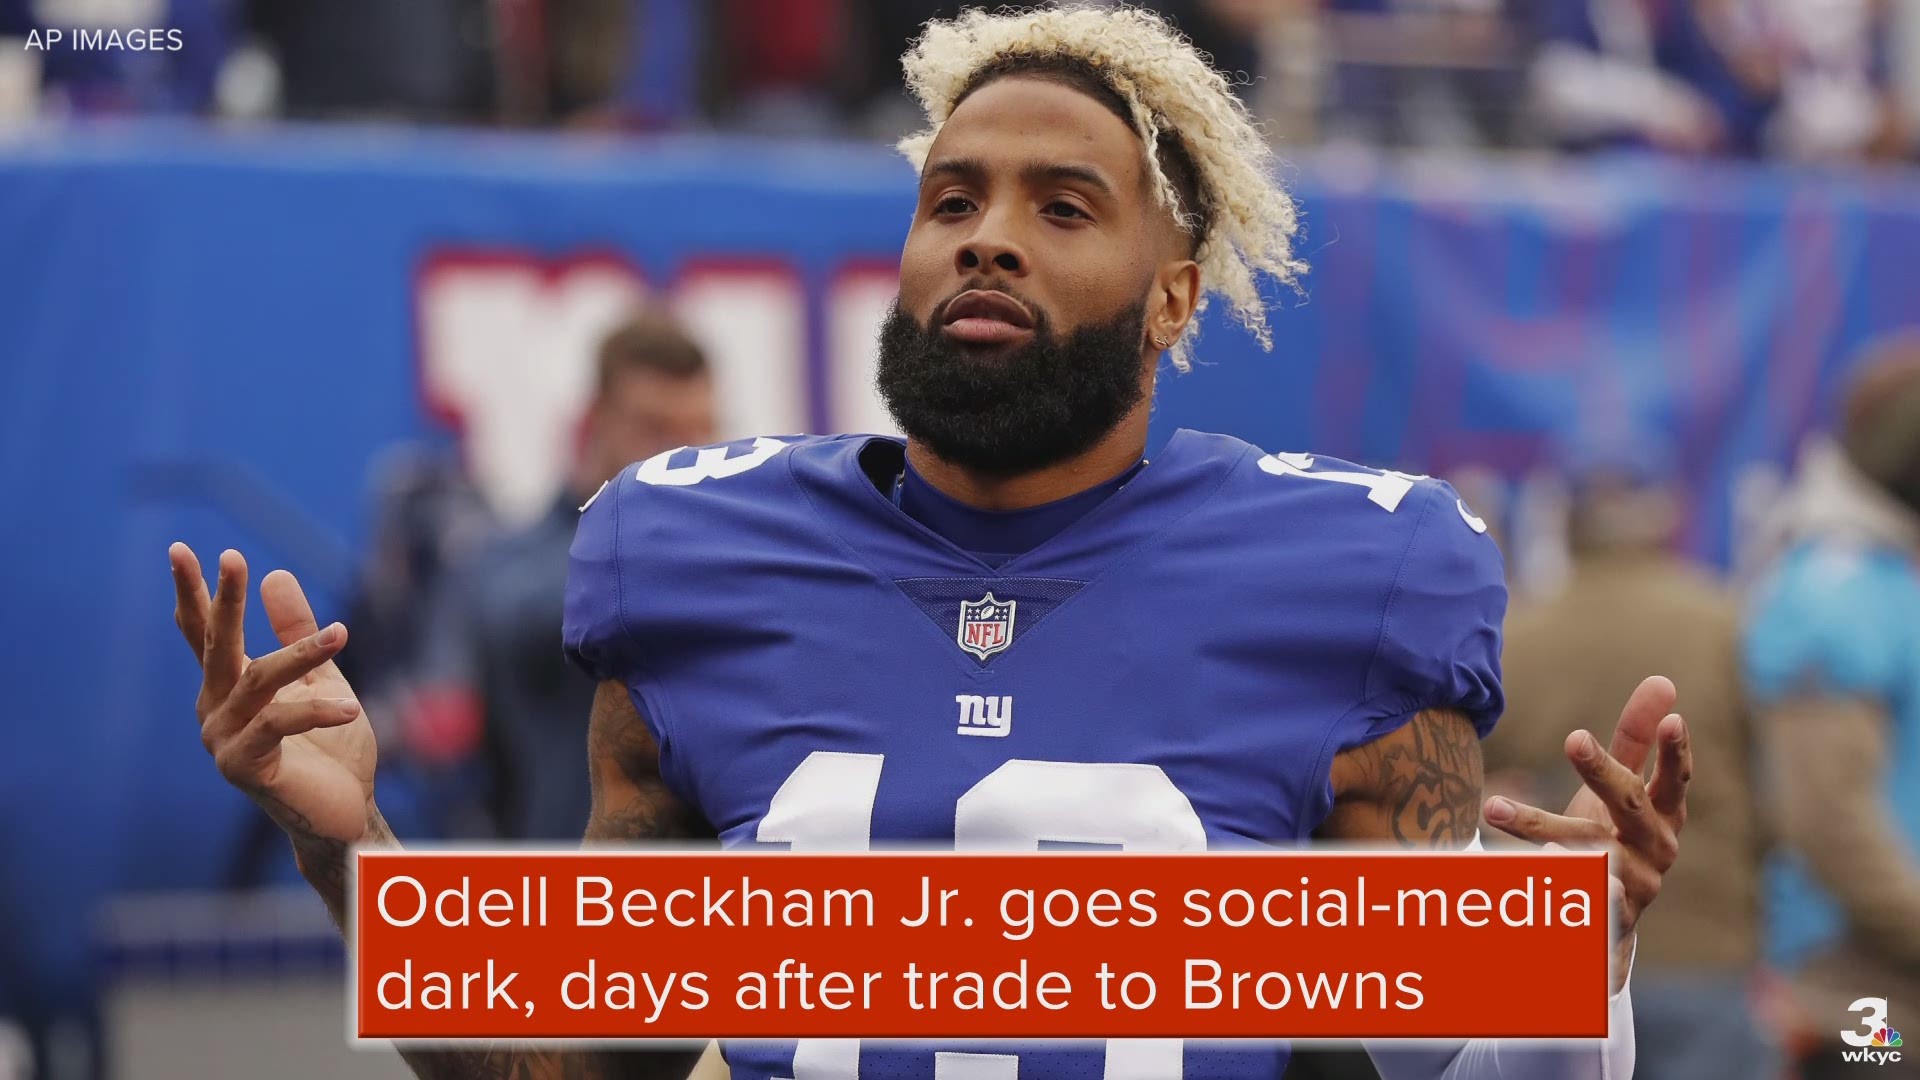 Odell Beckham Jr. has announced, and since deleted an Instagram post, that he is going social-media dark days after being traded to the Cleveland Browns.